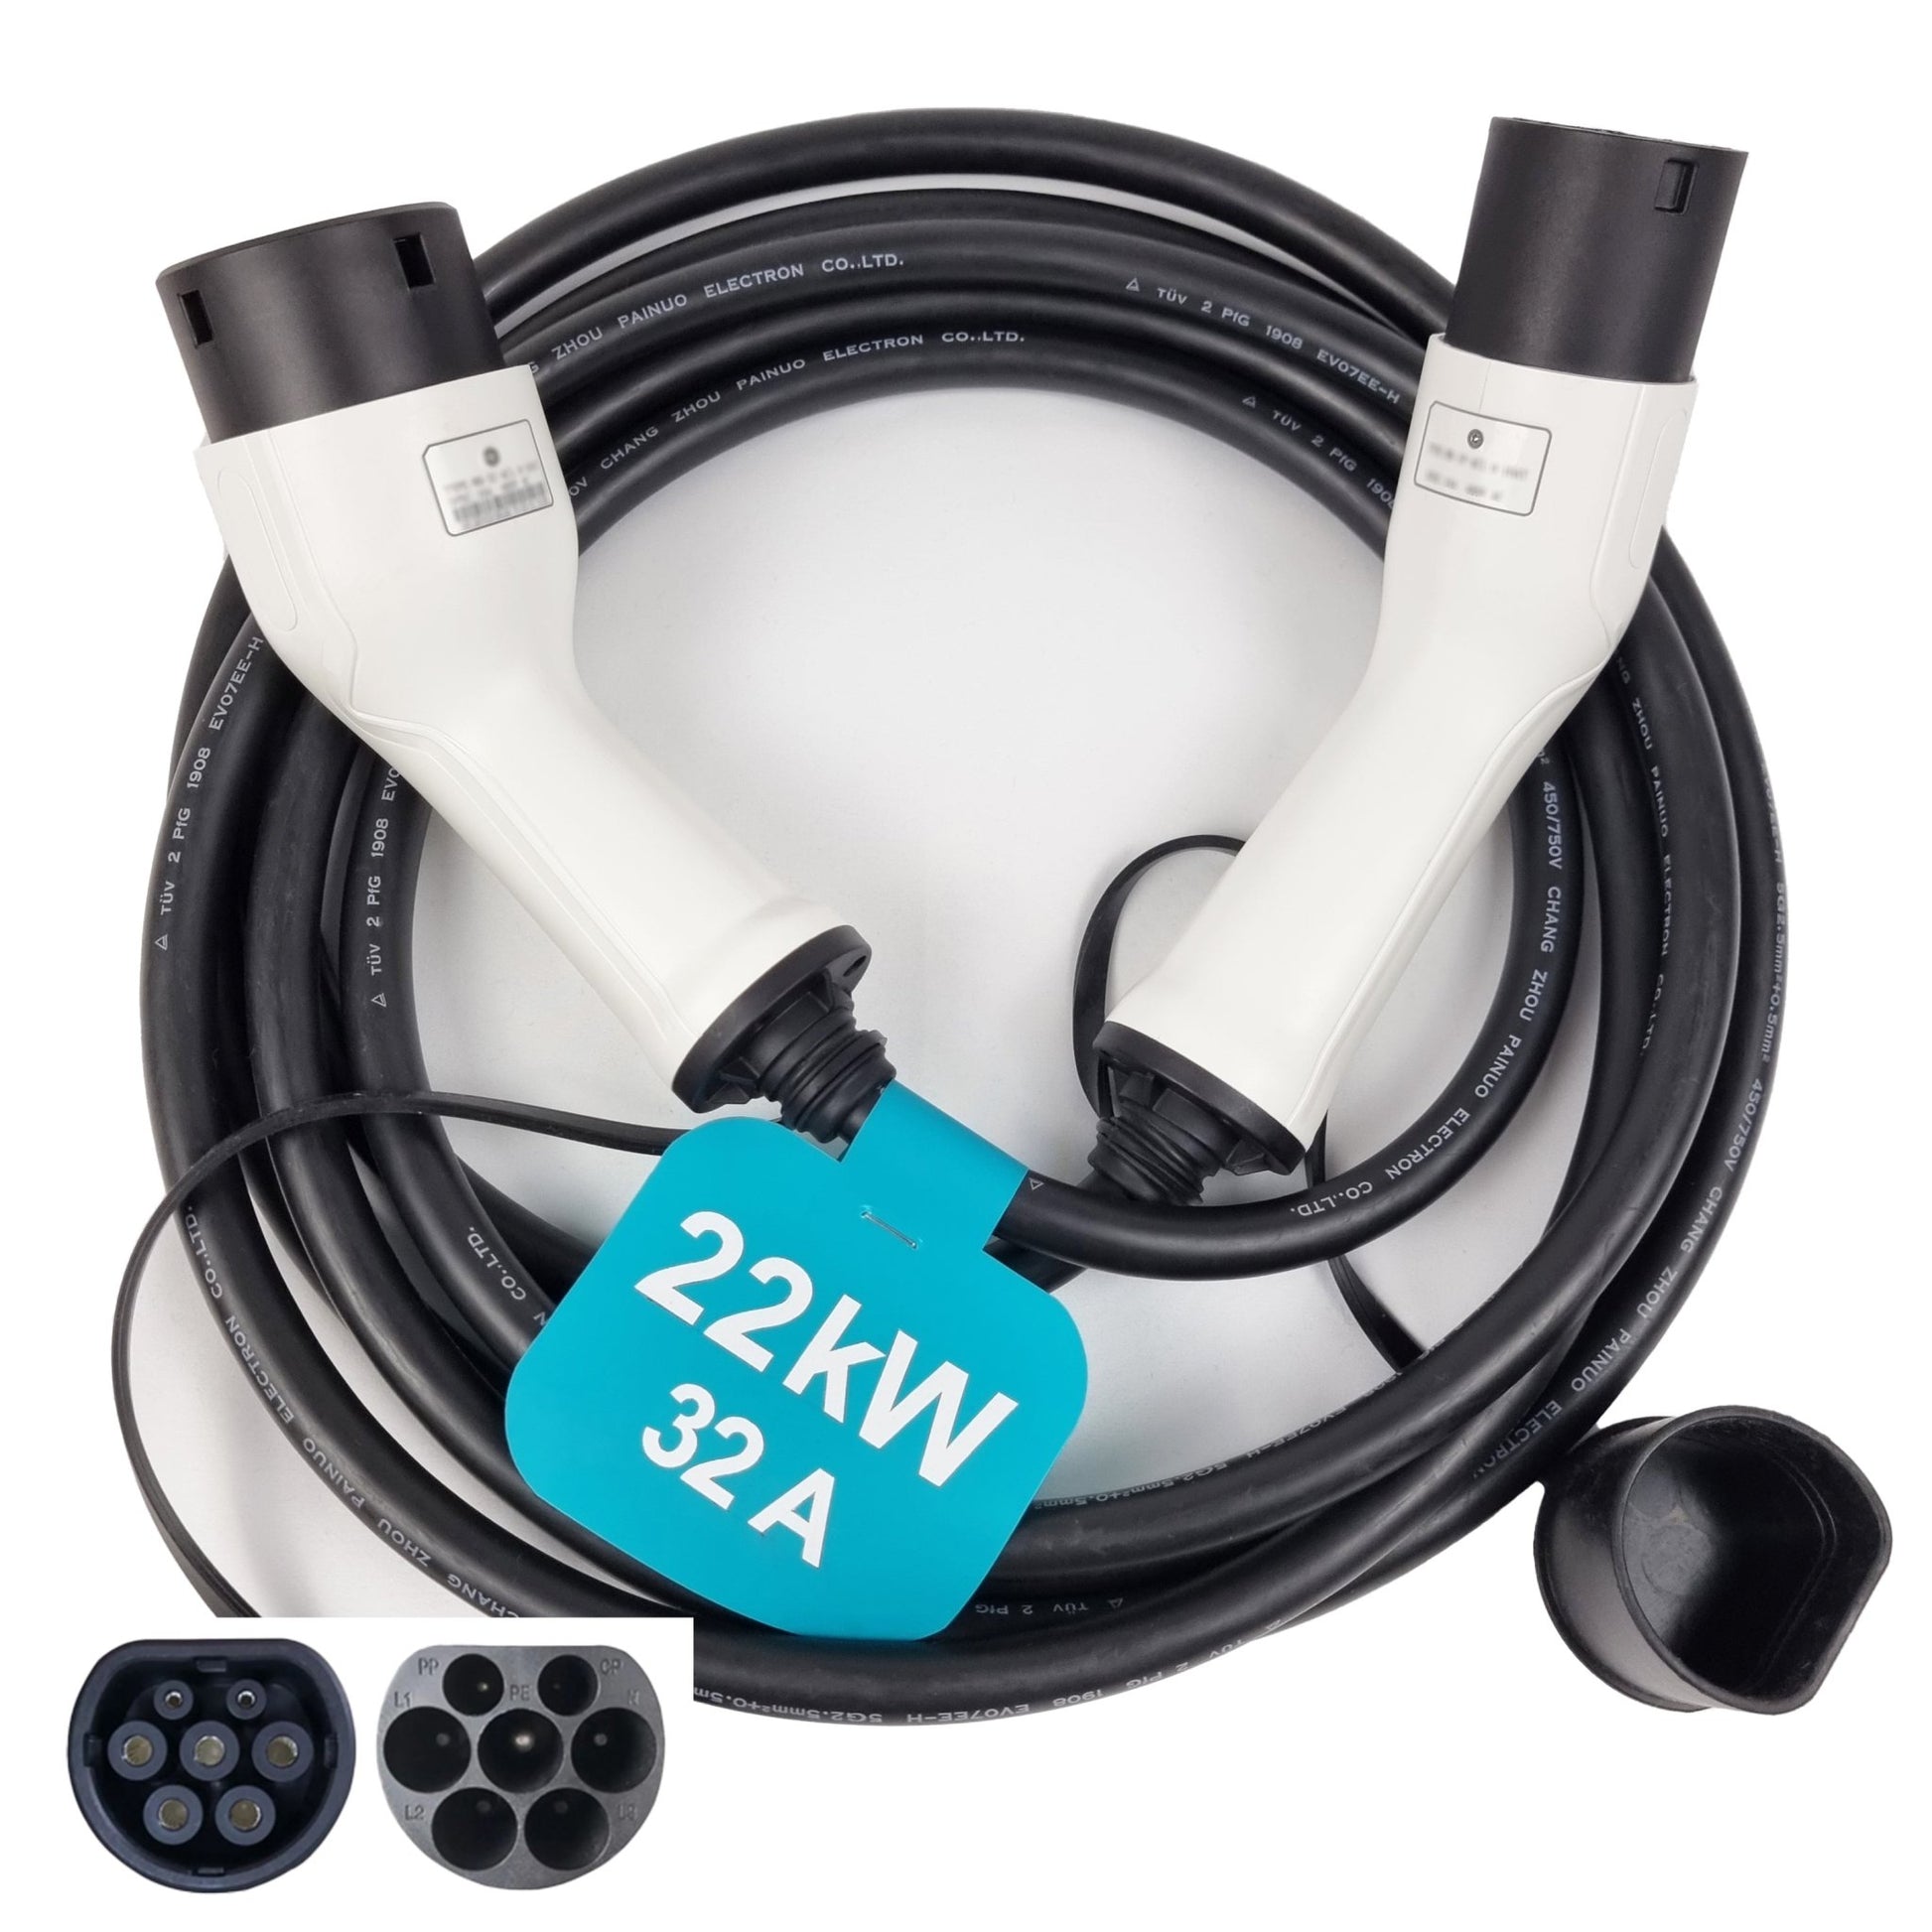 22KW Type 2 to Type 2 EV Charging Cable